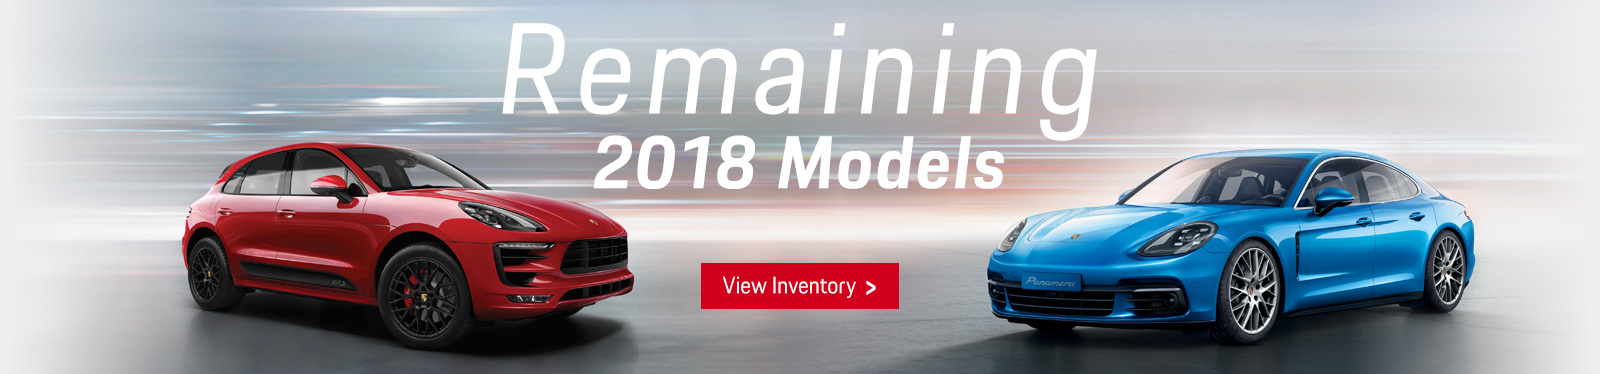 Remaining 2018 Porsche Models - Red Macan and Blue Panamera models in front of an abstract background